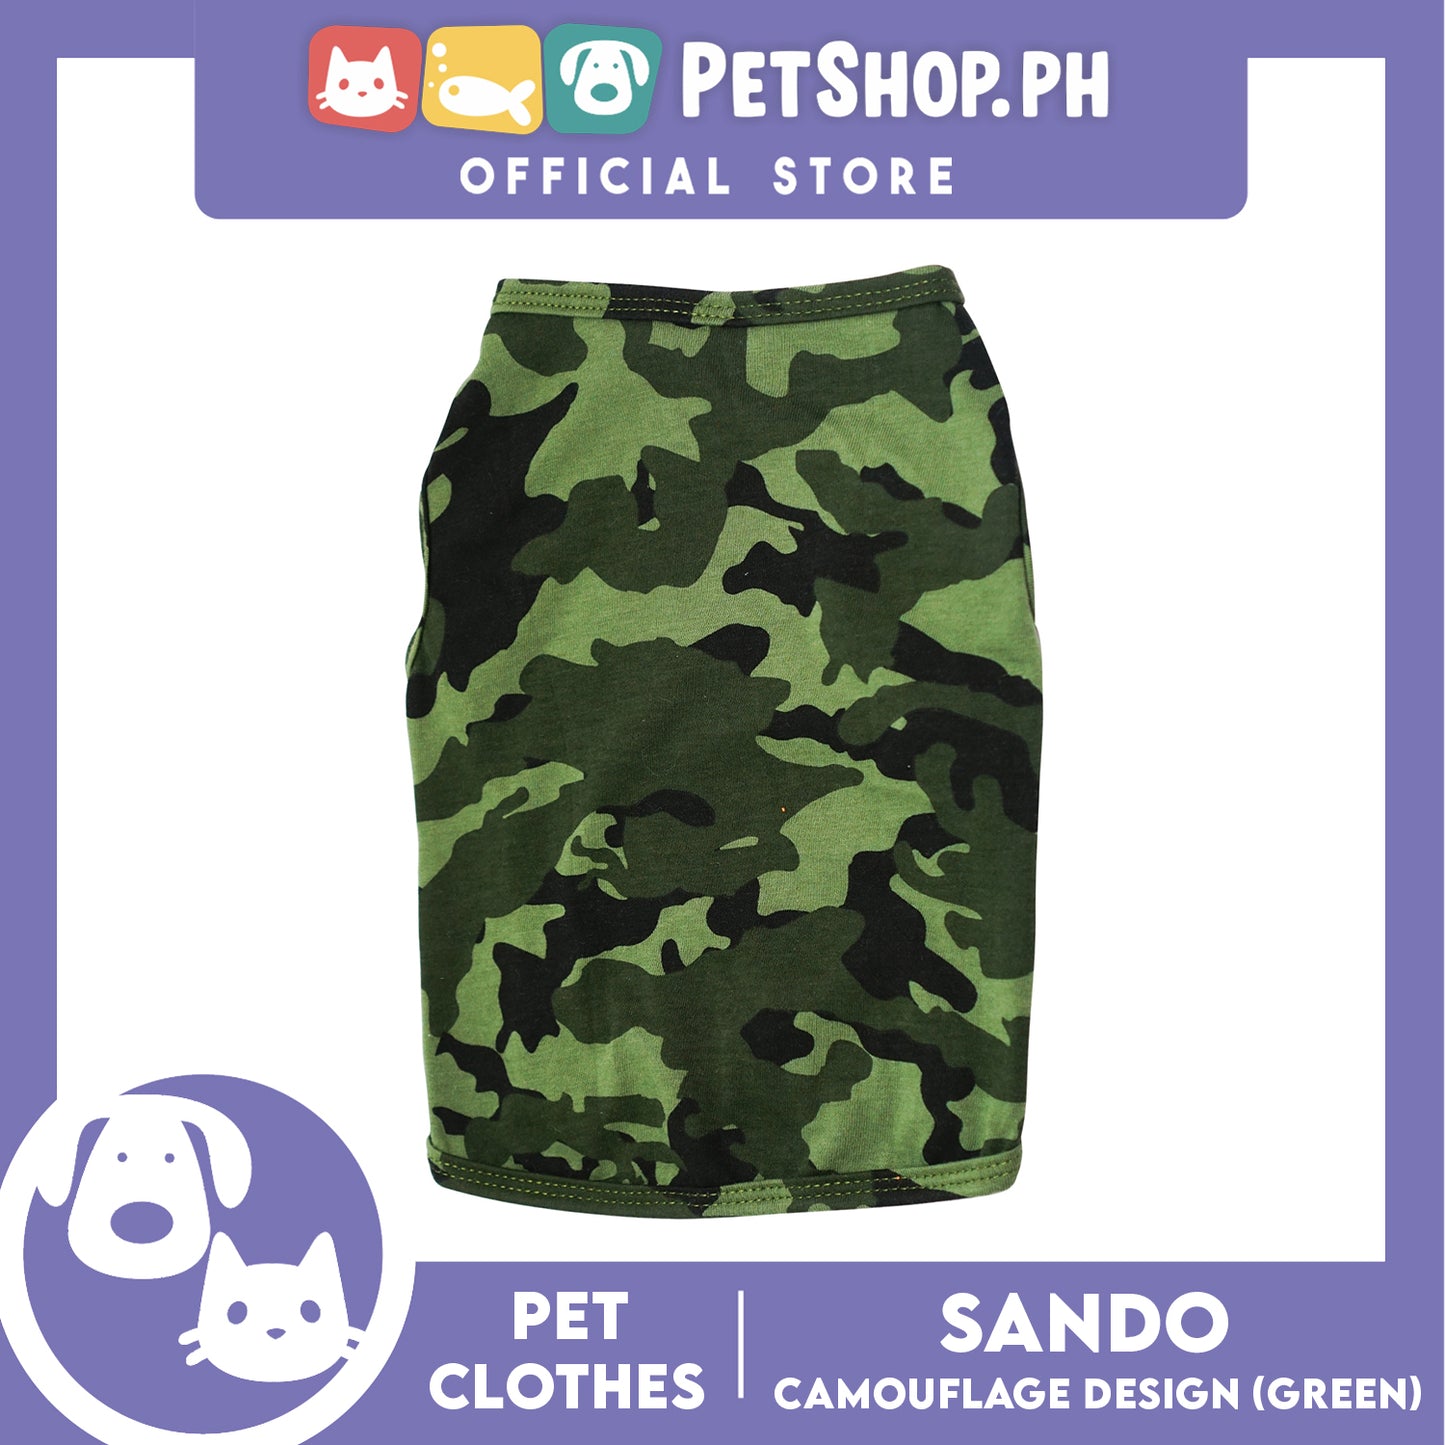 Pet Shirt Green Camouflage Design Sleeveless (Medium) for Puppy, Small Dogs and Cats